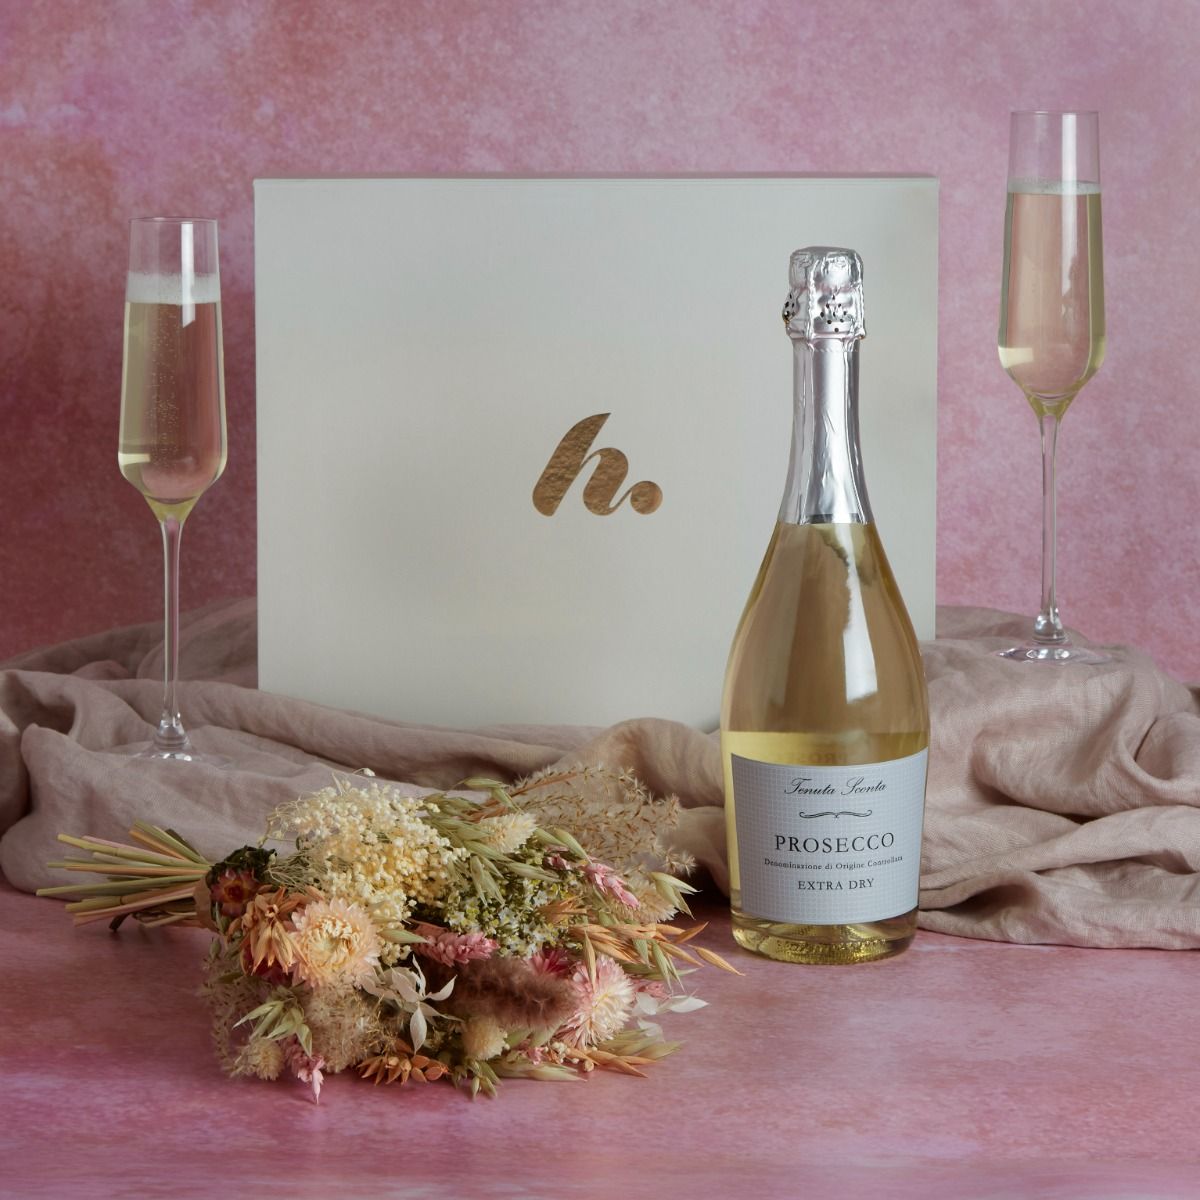 Valentine's prosecco & flower bouquet with contents on display